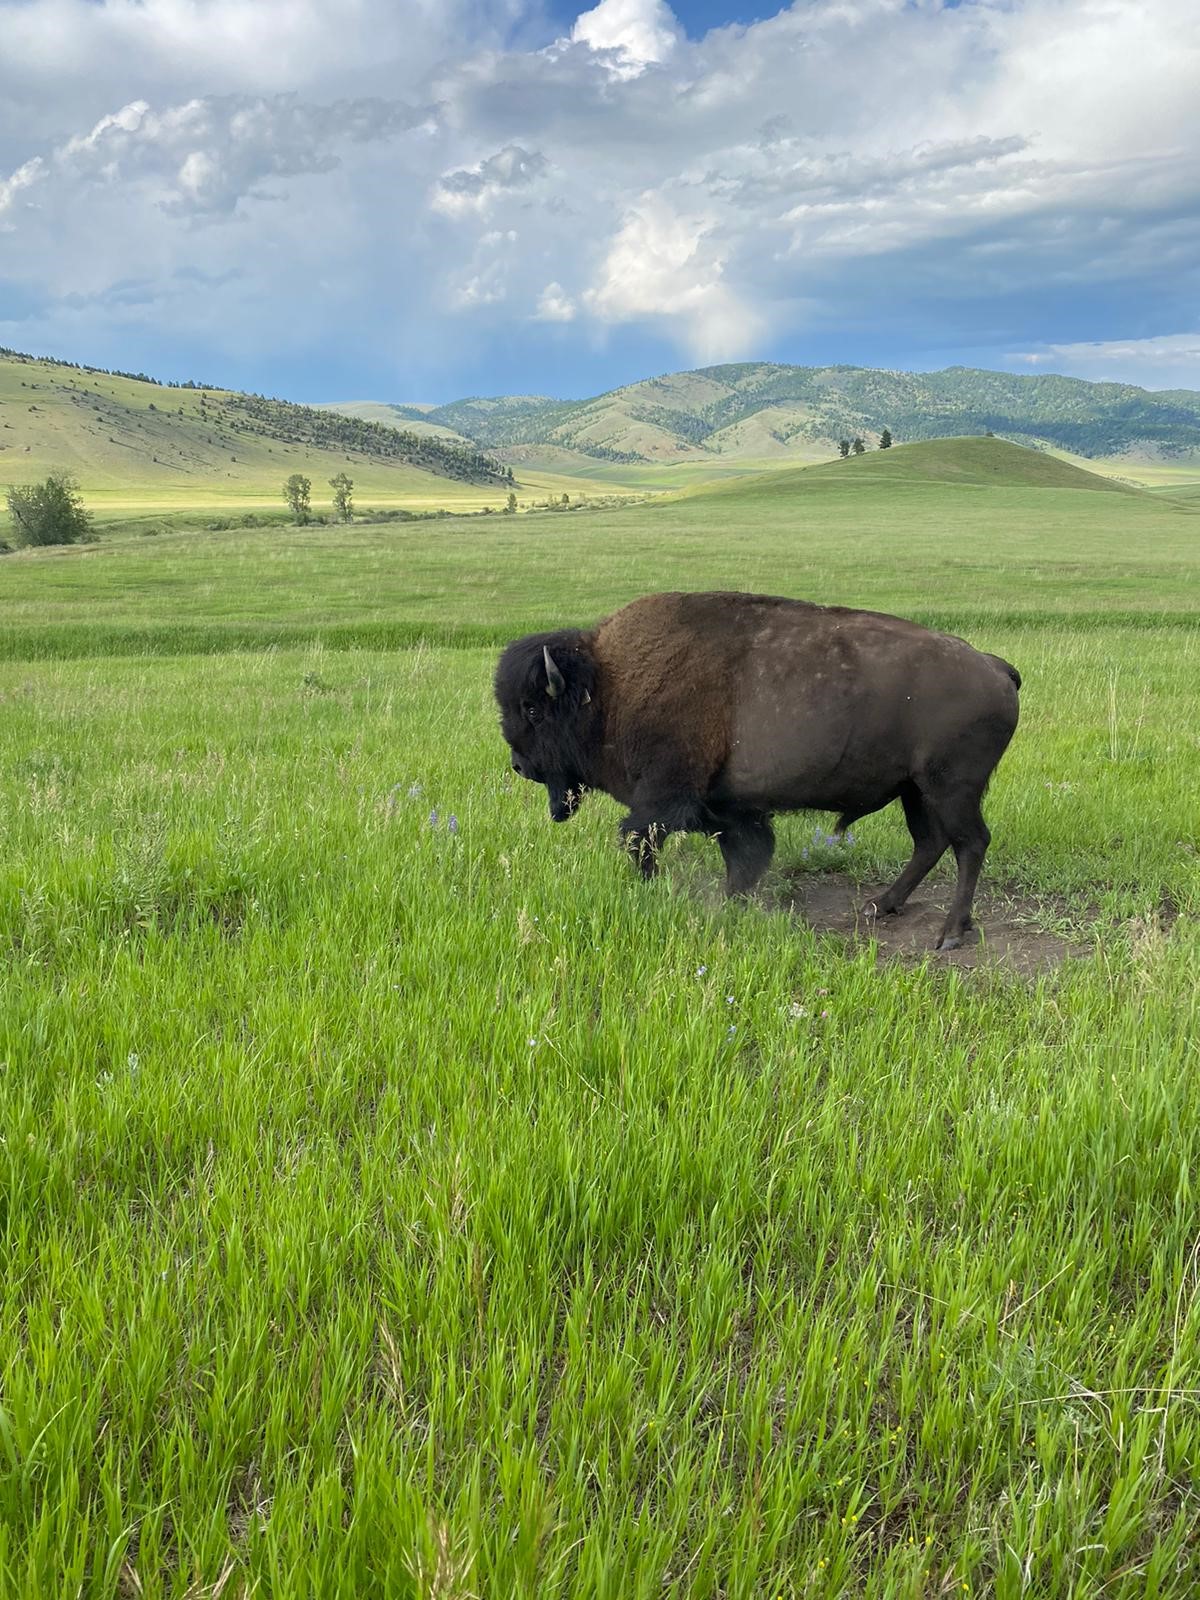 Local and translocated dataset of bison body mass, age, sex across latitude at Turner Ranches through the last two decades